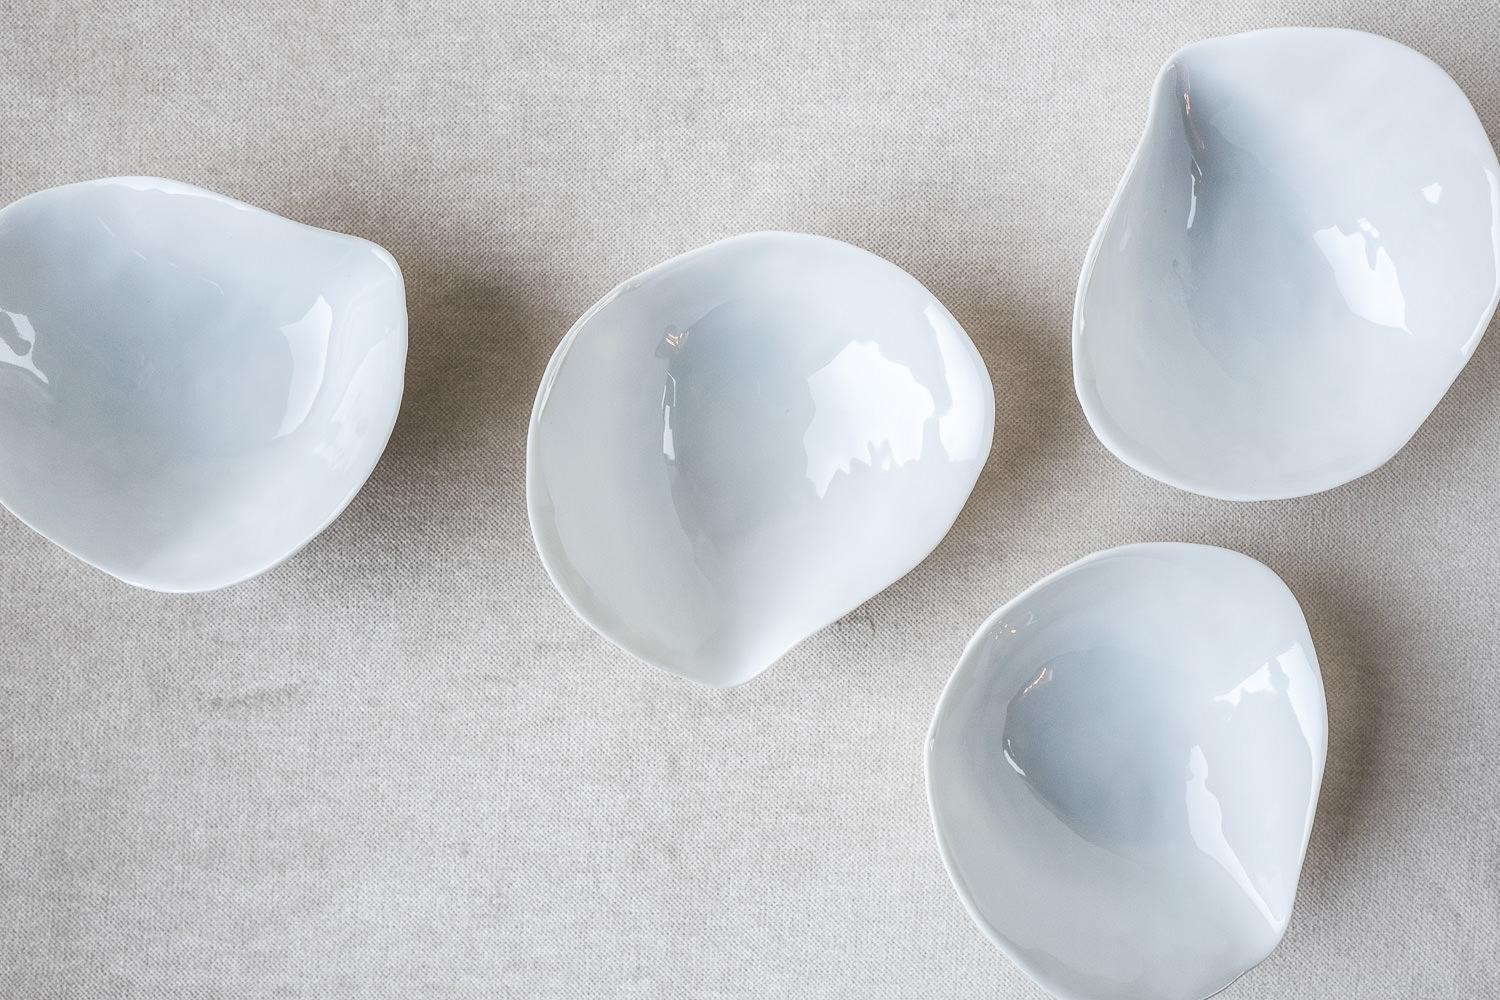 • Set of 4 small side bowls
• Measures: 10.5cm x 11cm x 4.7cm
• Perfect for a sexy amuse-bouche, a pre-dessert or side dish
• White glazed top, unglazed textured bottom
• Designed in Amsterdam / handmade in France
• True Porcelaine de